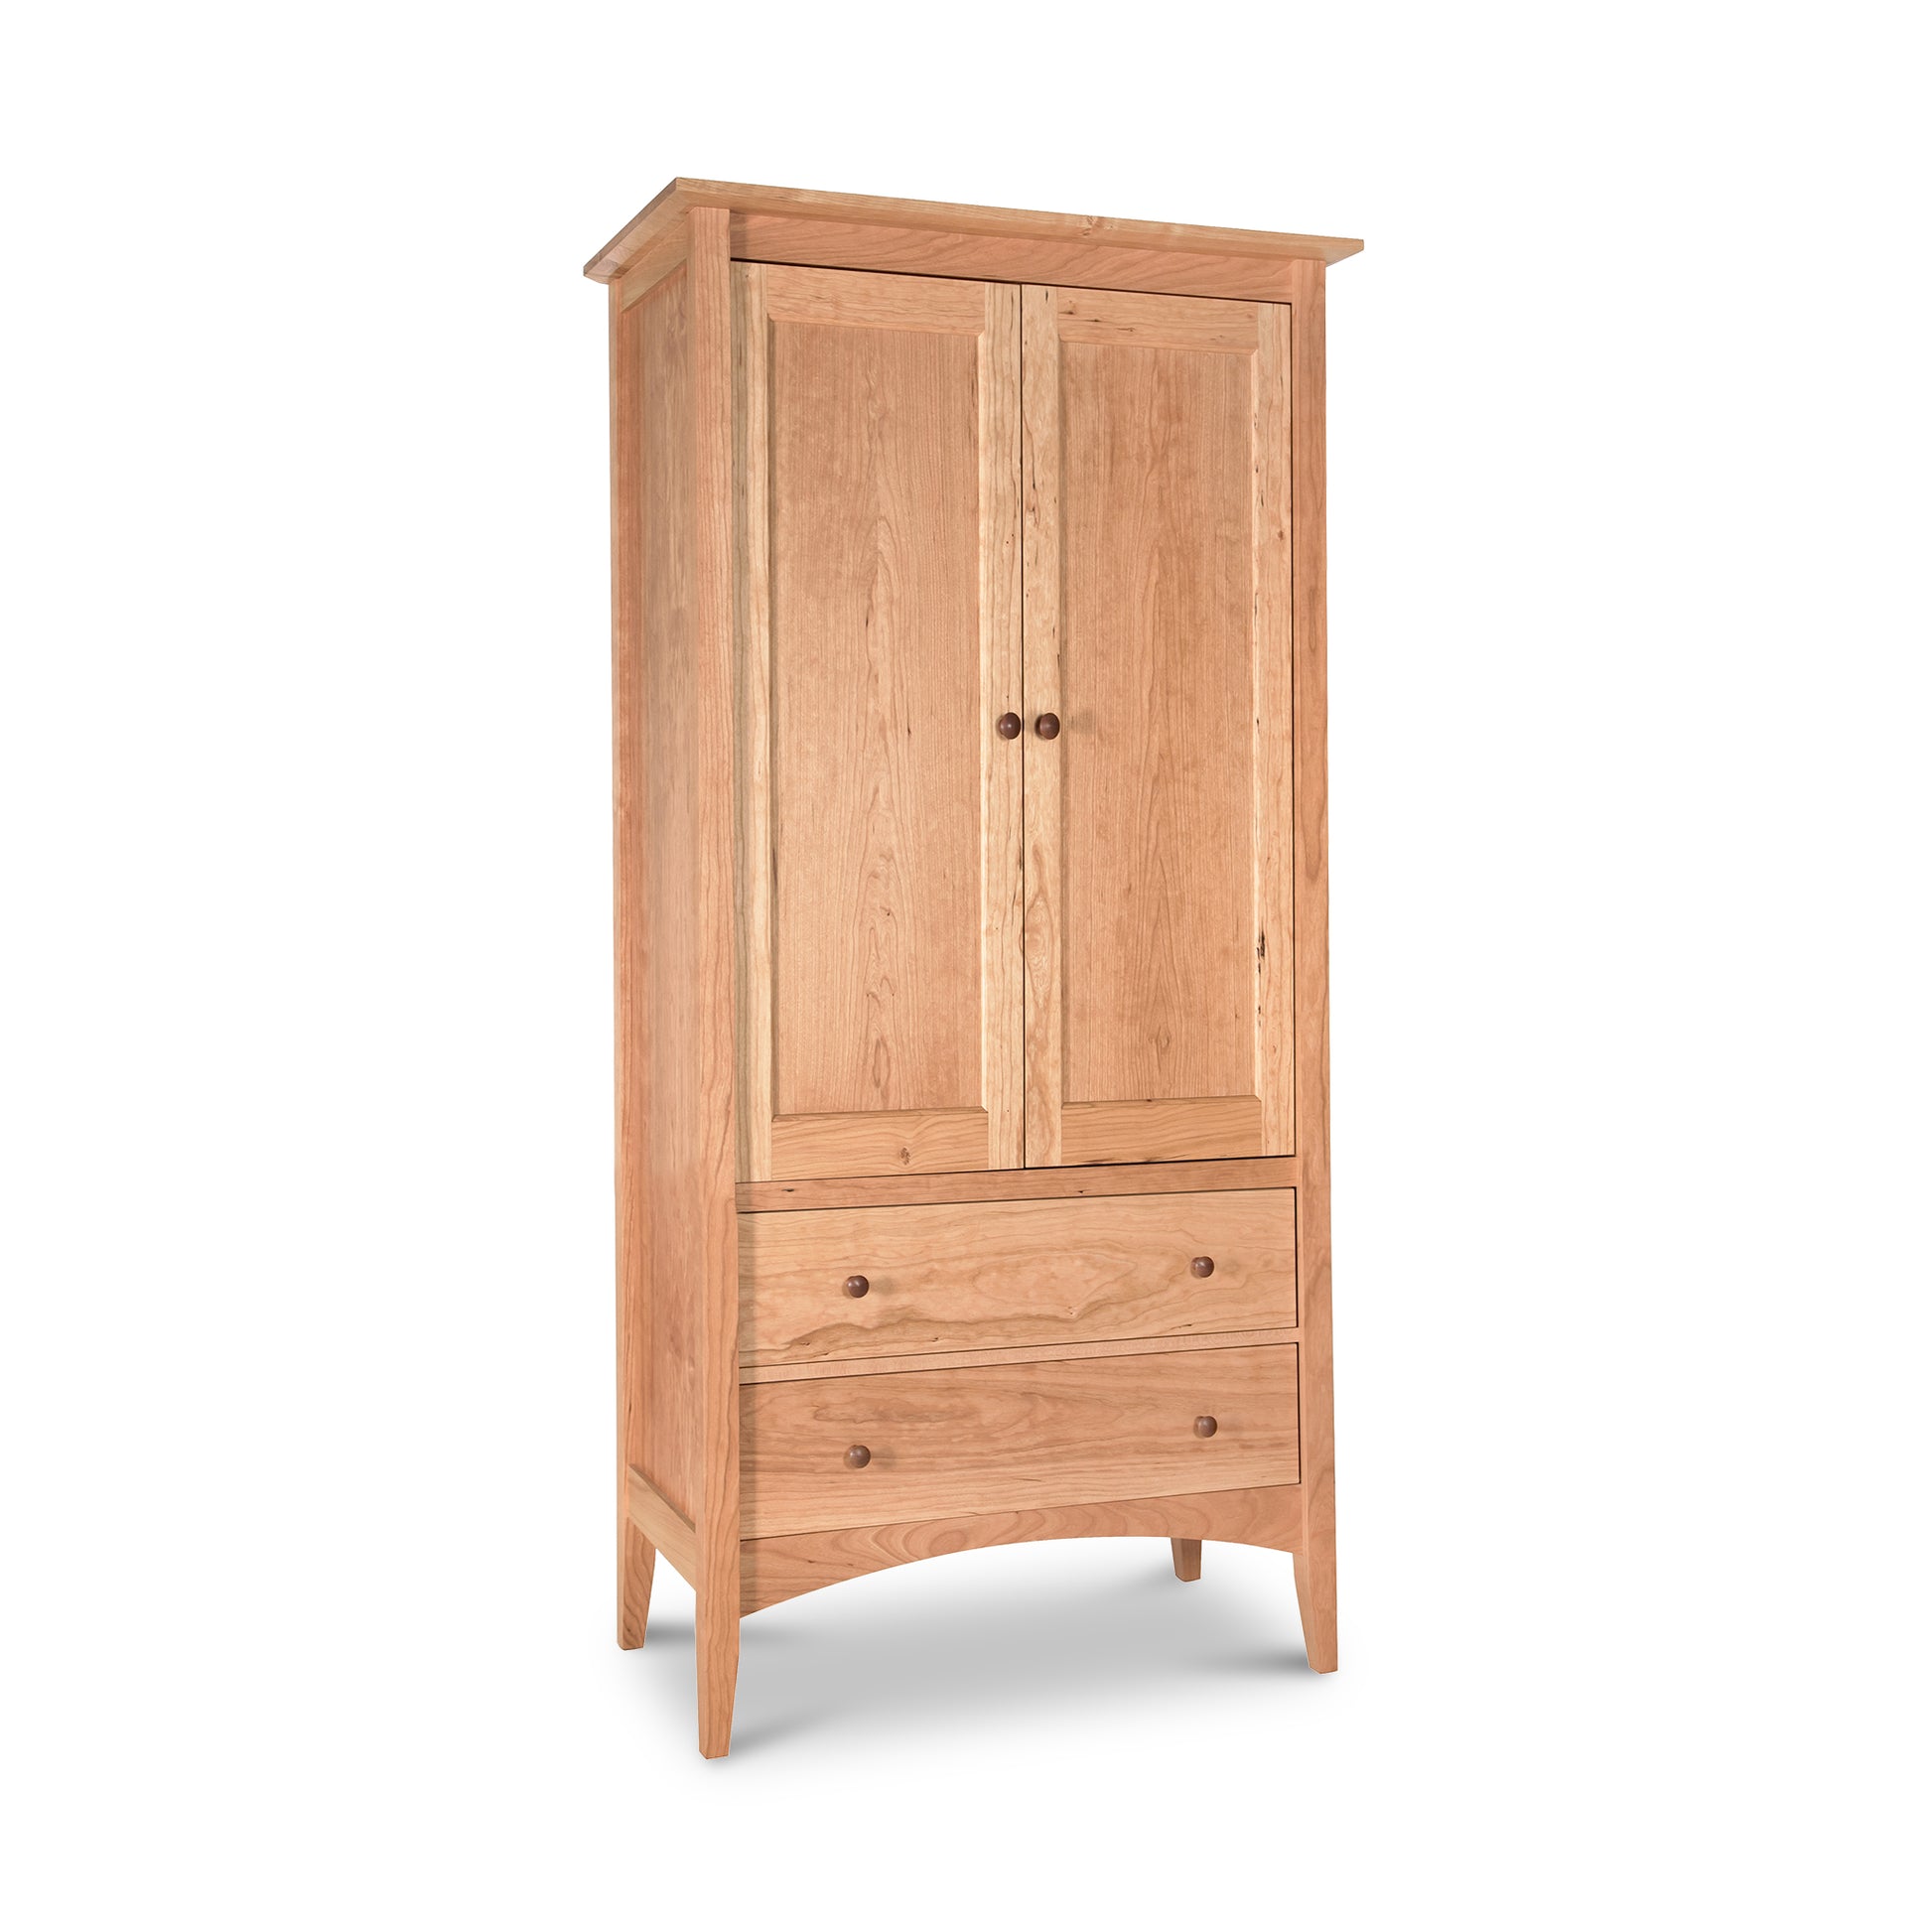 A Maple Corner Woodworks American Shaker Armoire featuring two doors and a lower section with two drawers, set against a white background.